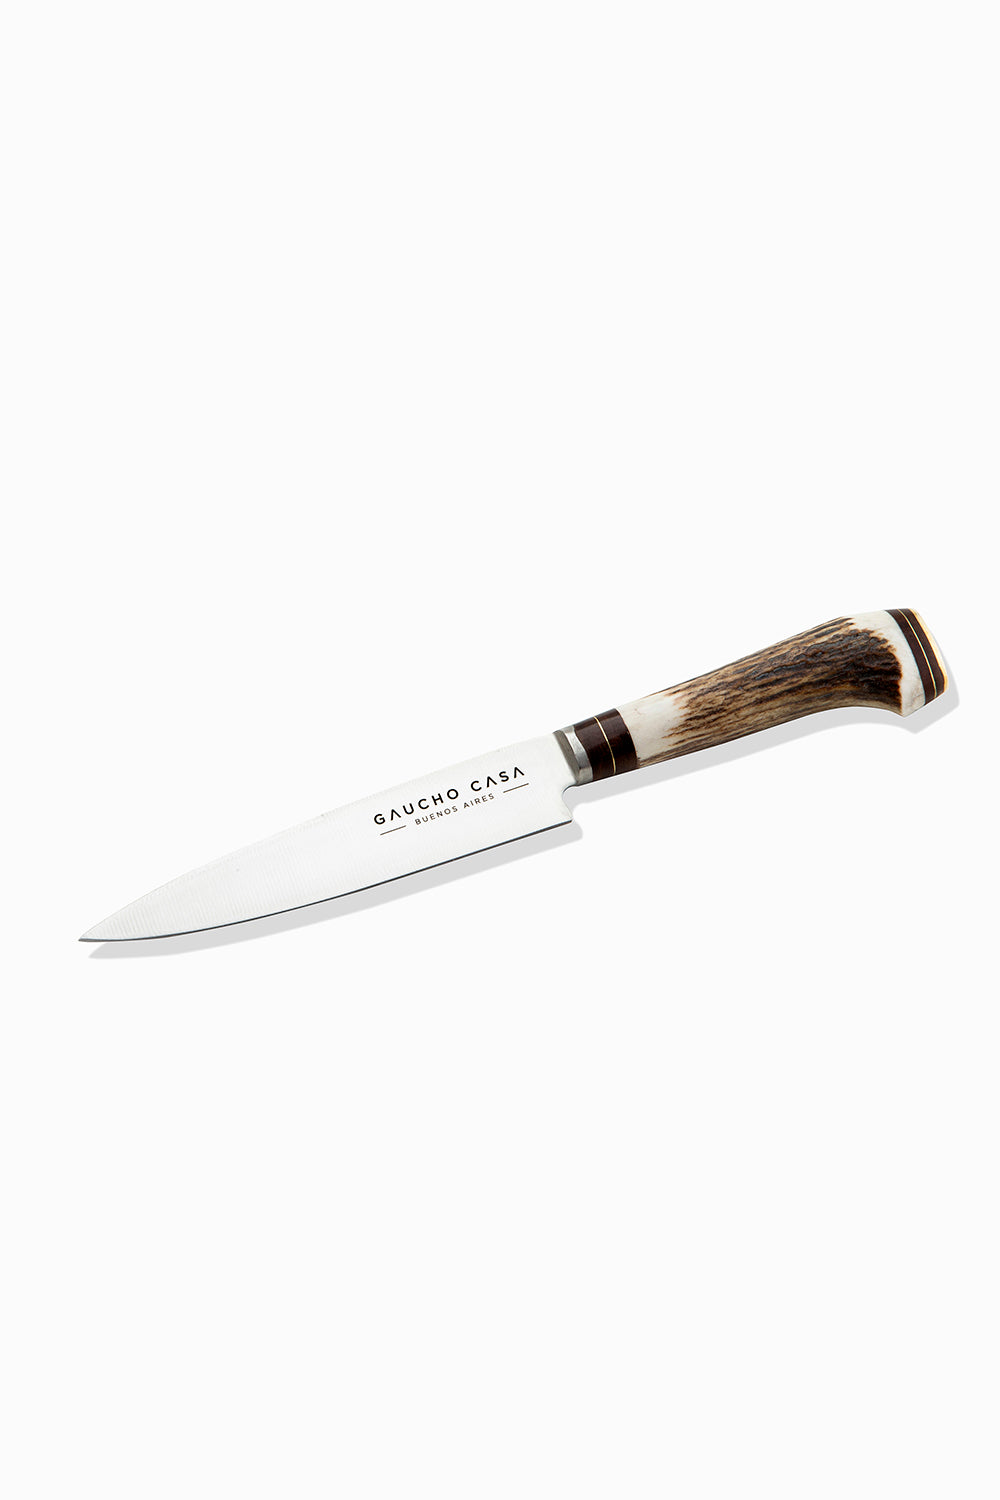 Gaucho Casa Tandil Gaucho Knife With Deer Horn Handle and Stainless-Steel Blade